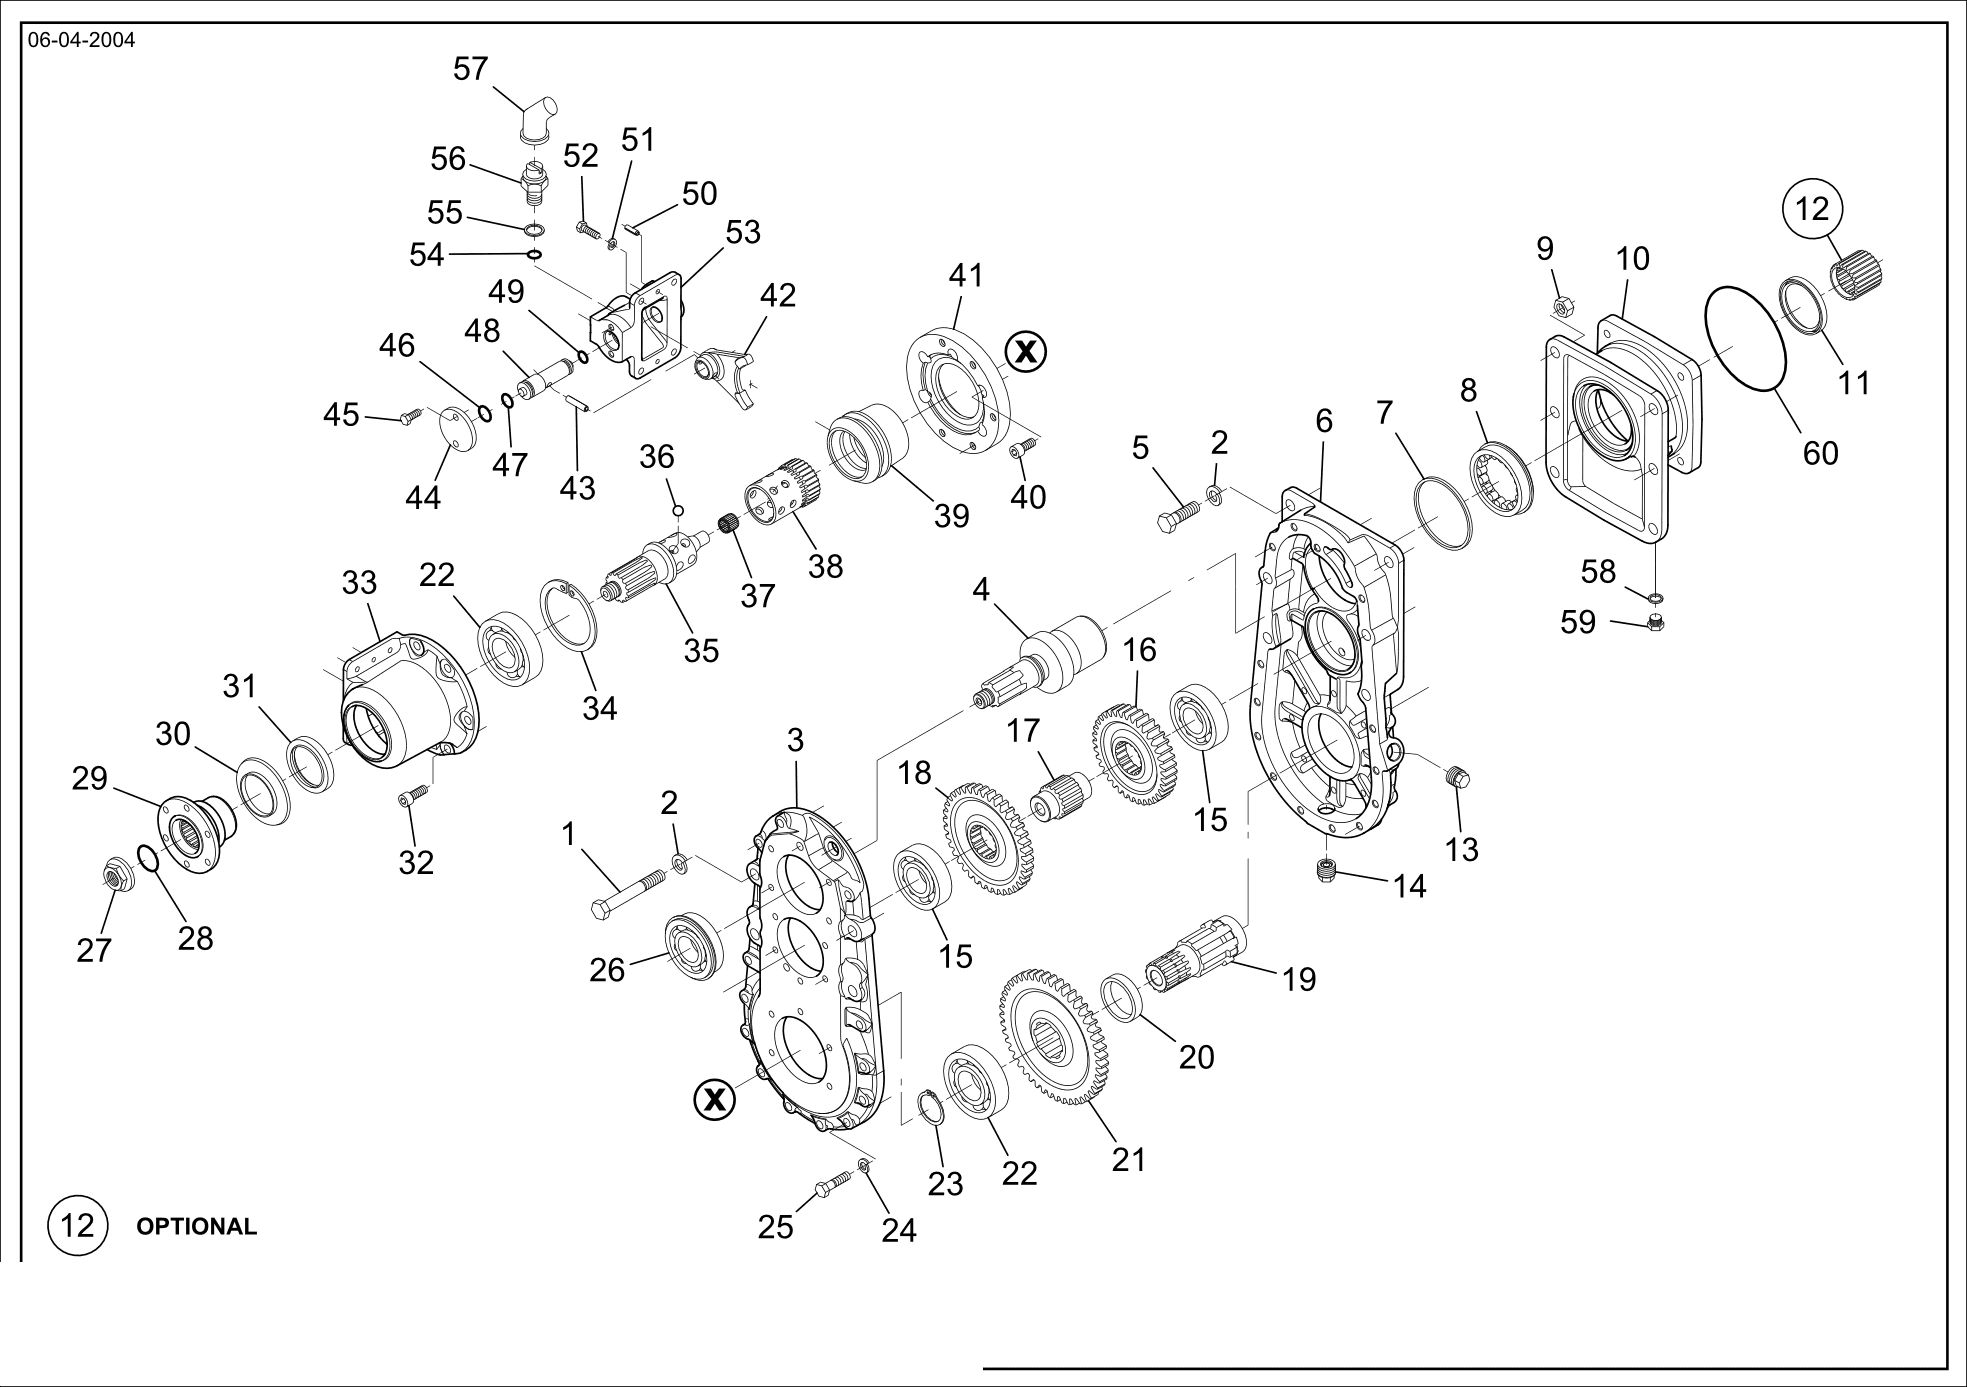 drawing for CNH NEW HOLLAND N13370 - ROLL PIN (figure 4)